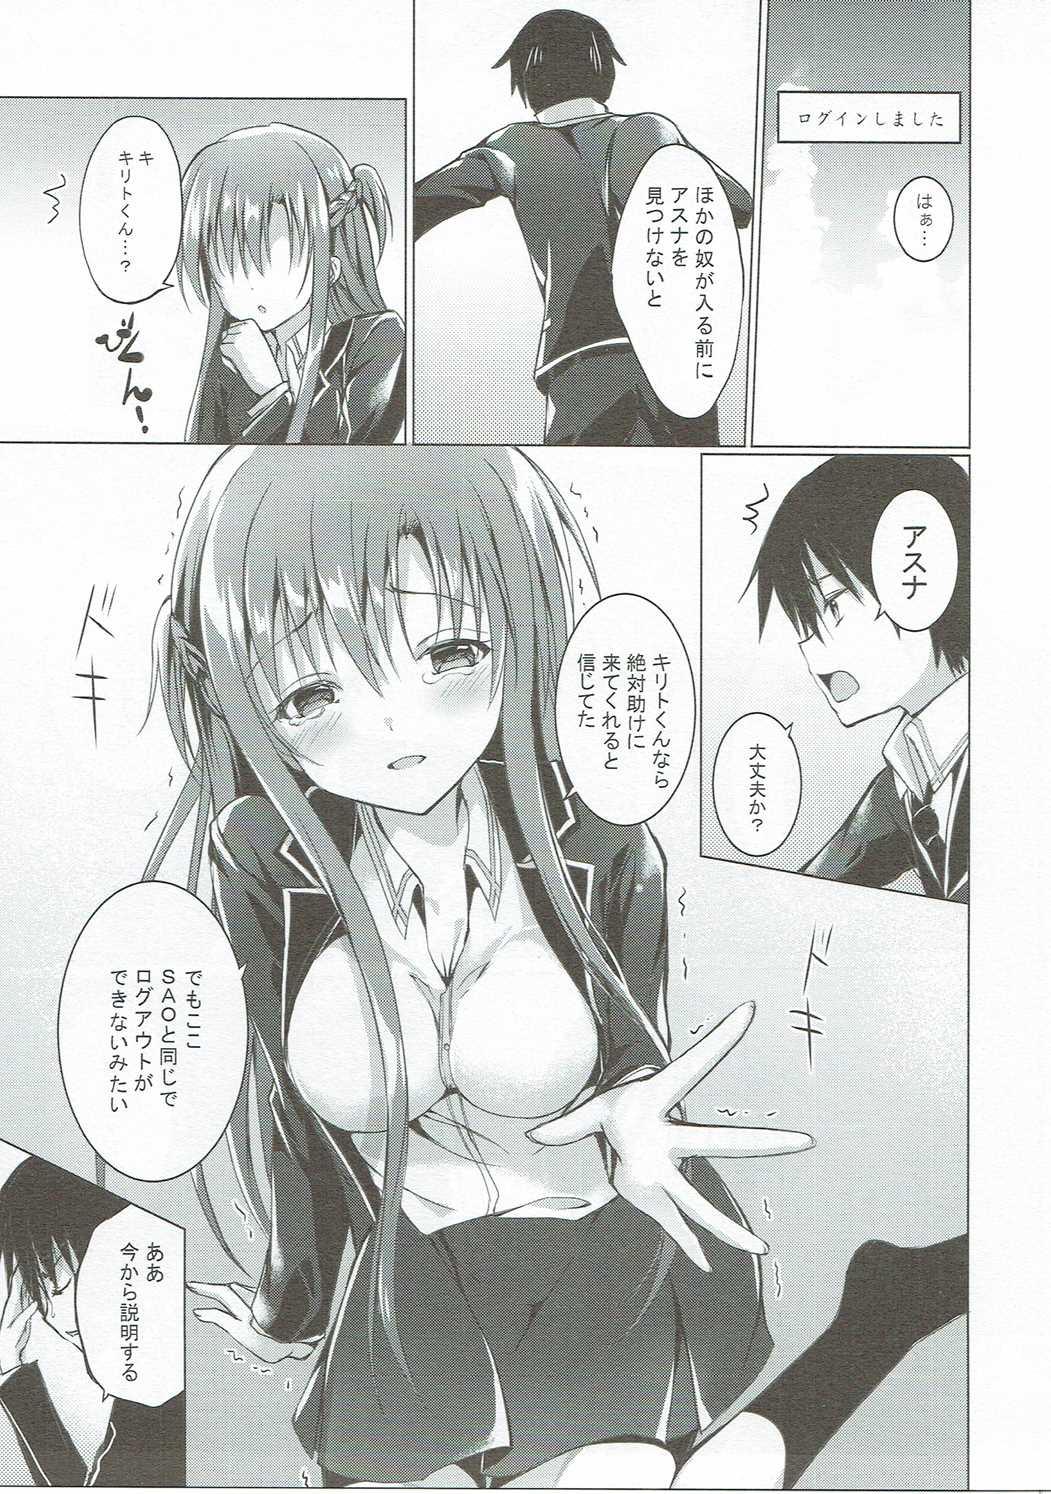 Virginity Asuna to VR Game - Sword art online Boobies - Page 6